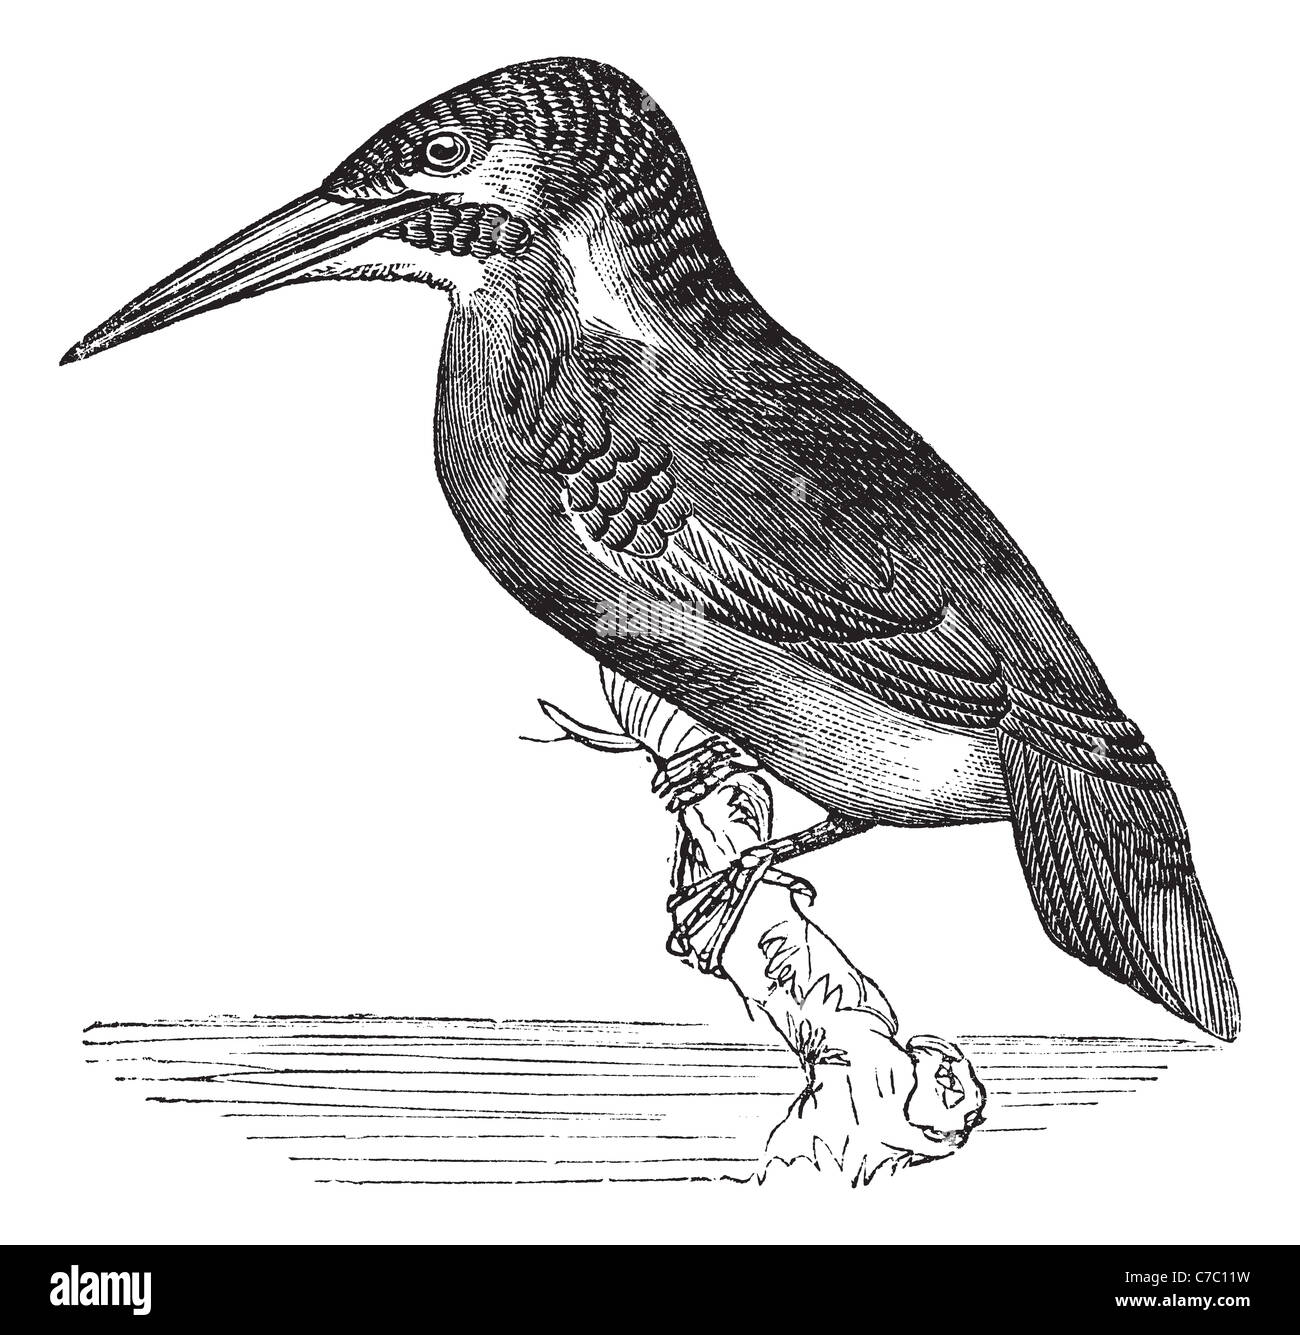 Common Kingfisher or Alcedo ispida, vintage engraving. Old engraved illustration of Common Kingfisher waiting on a branch. Stock Photo